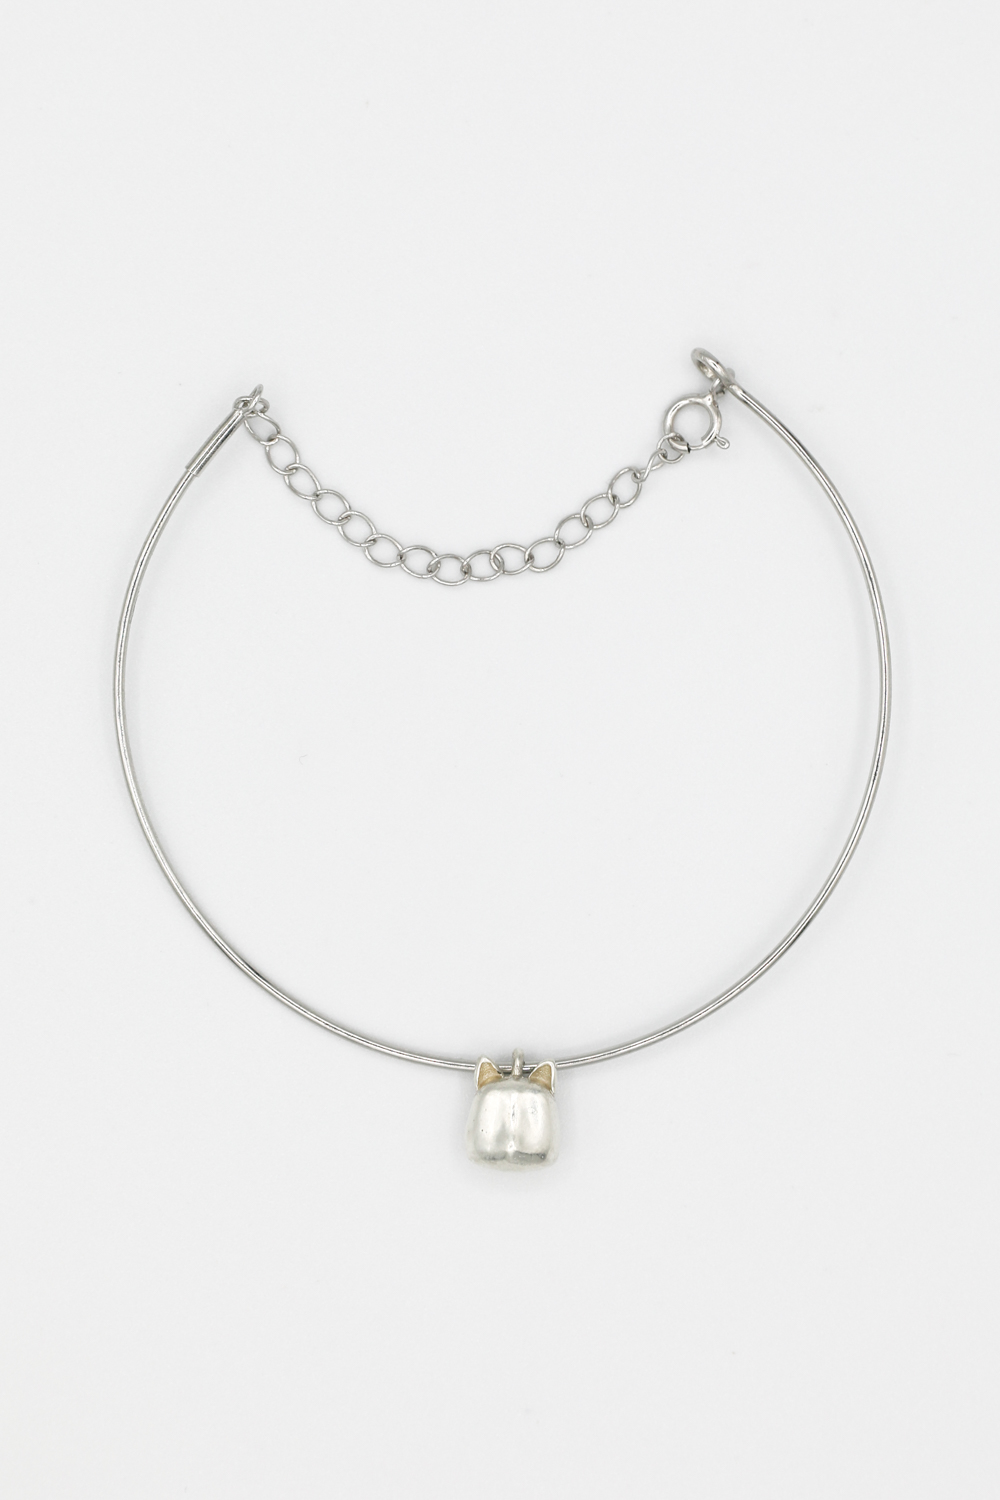 The Petite Cat Cuff Bracelet with Safety Chain